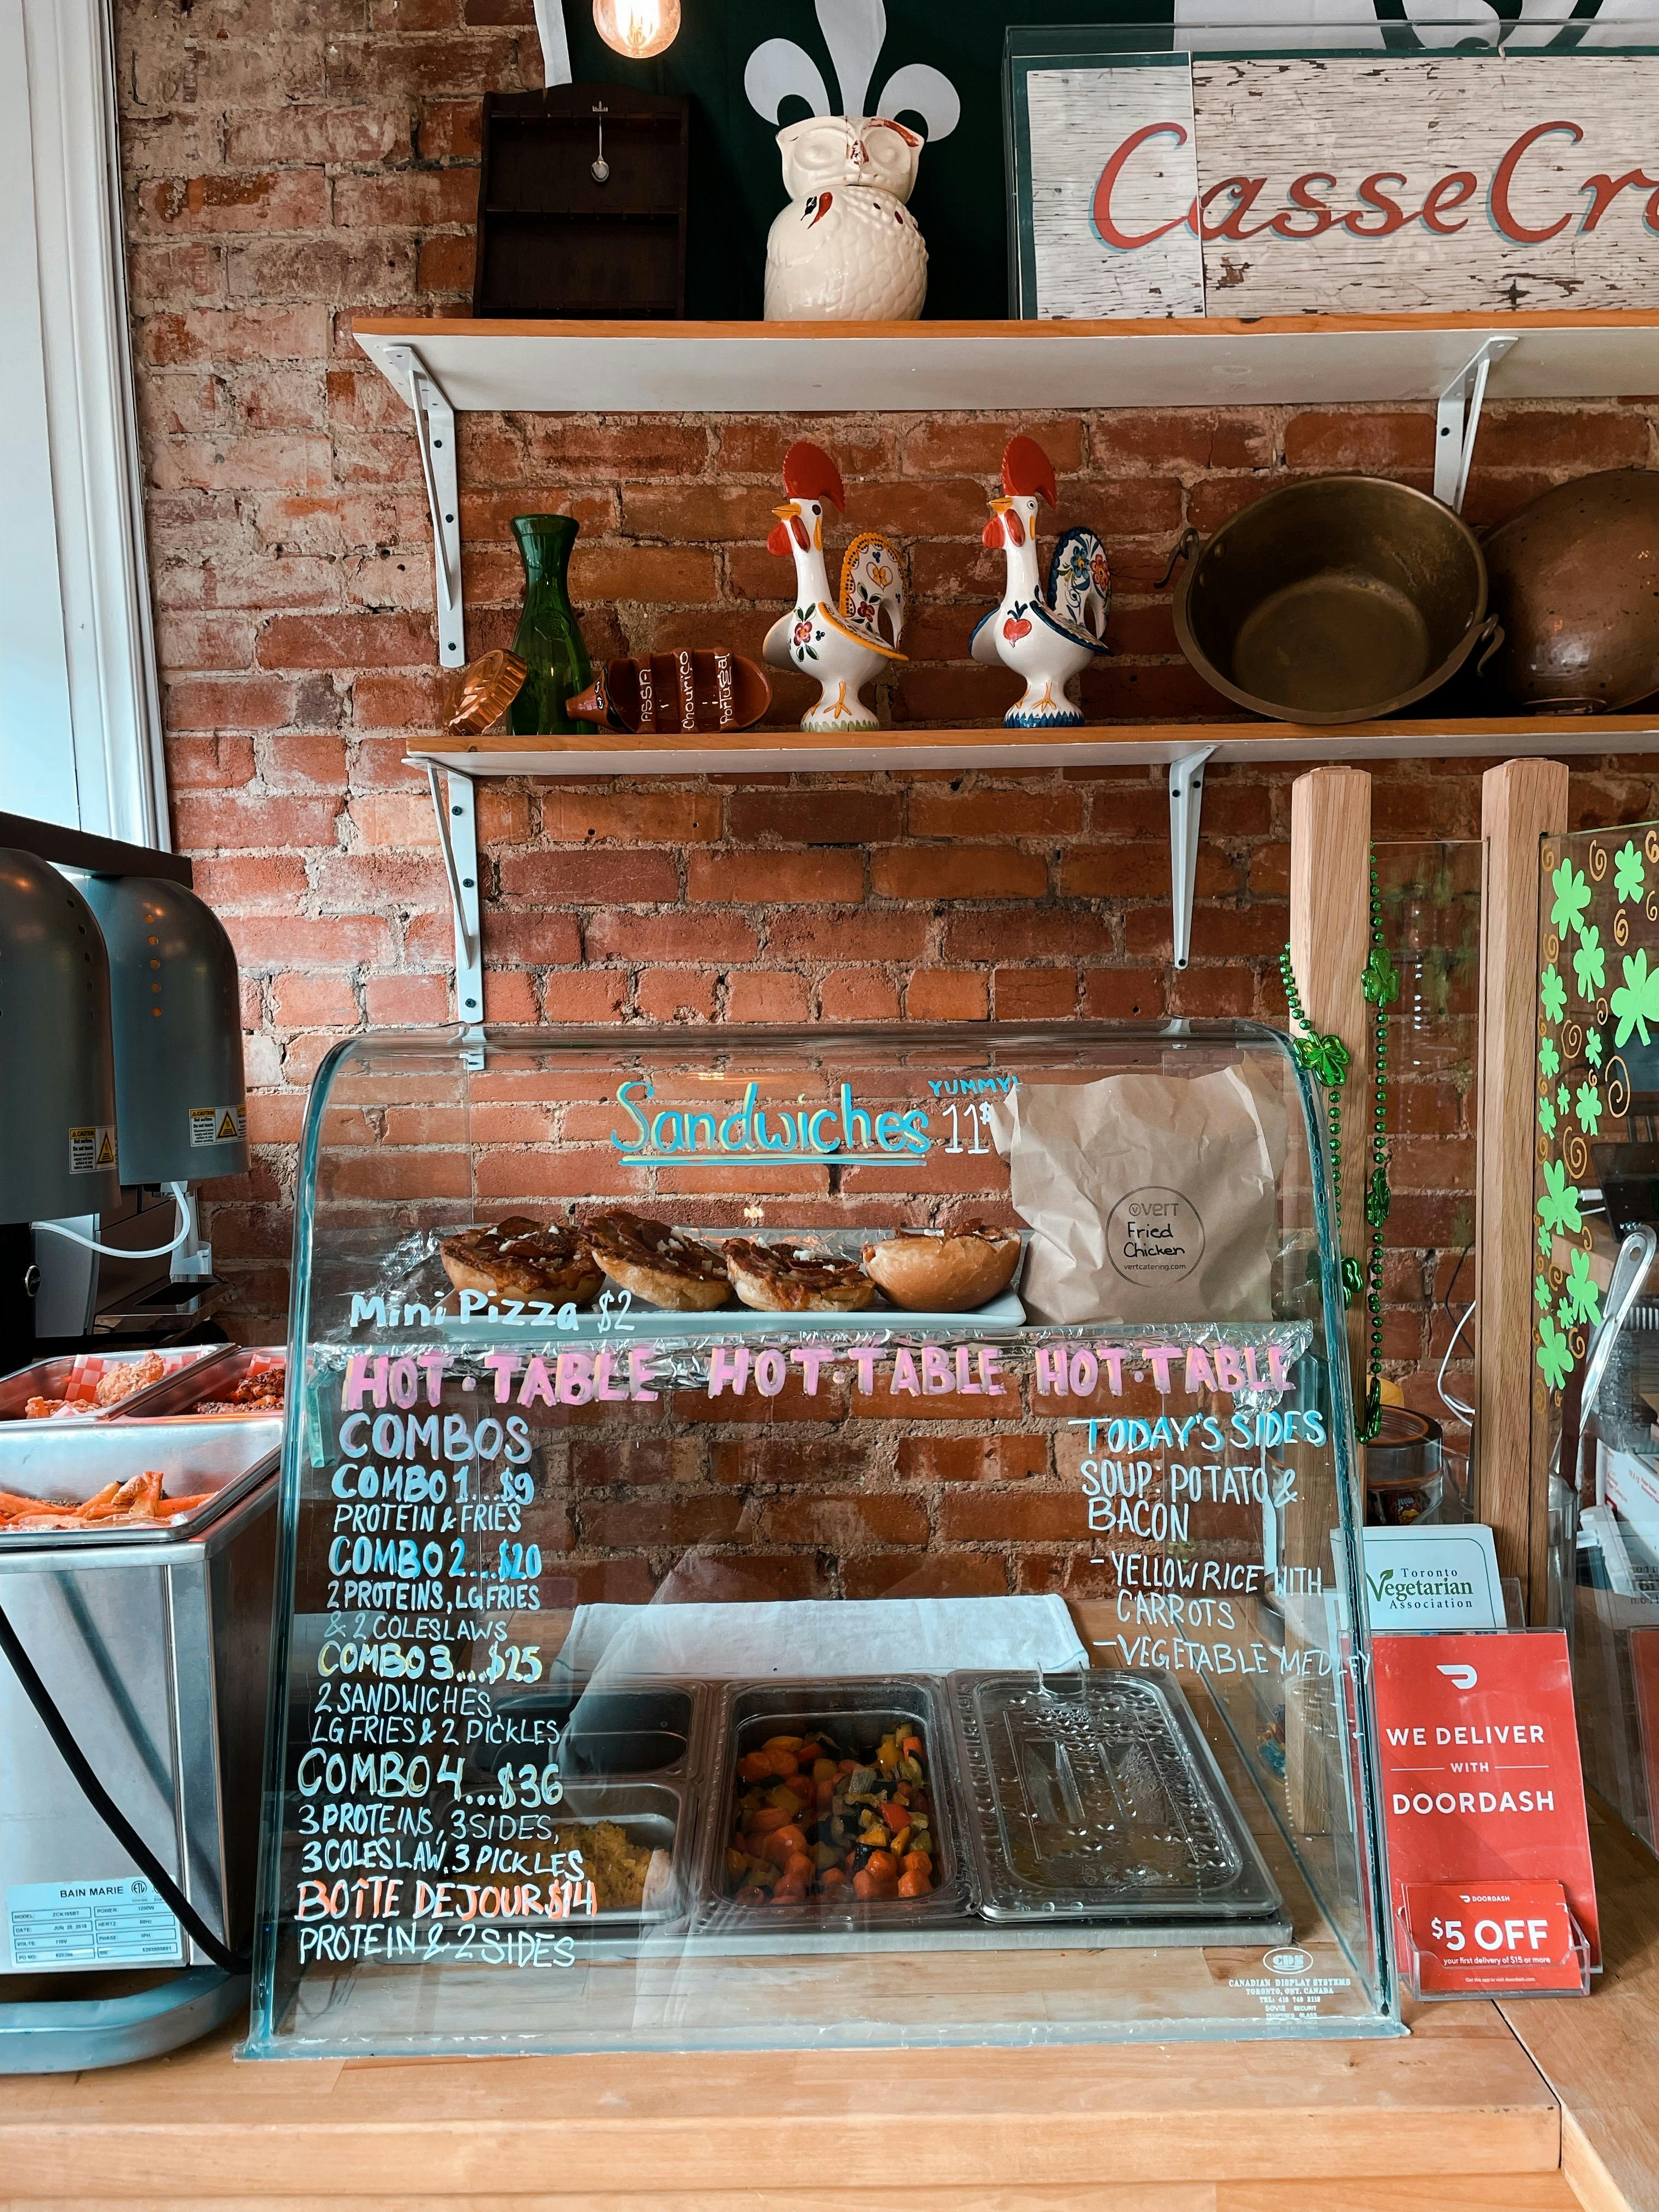 Vert's hot-food table featuring various vegan sides and proteins